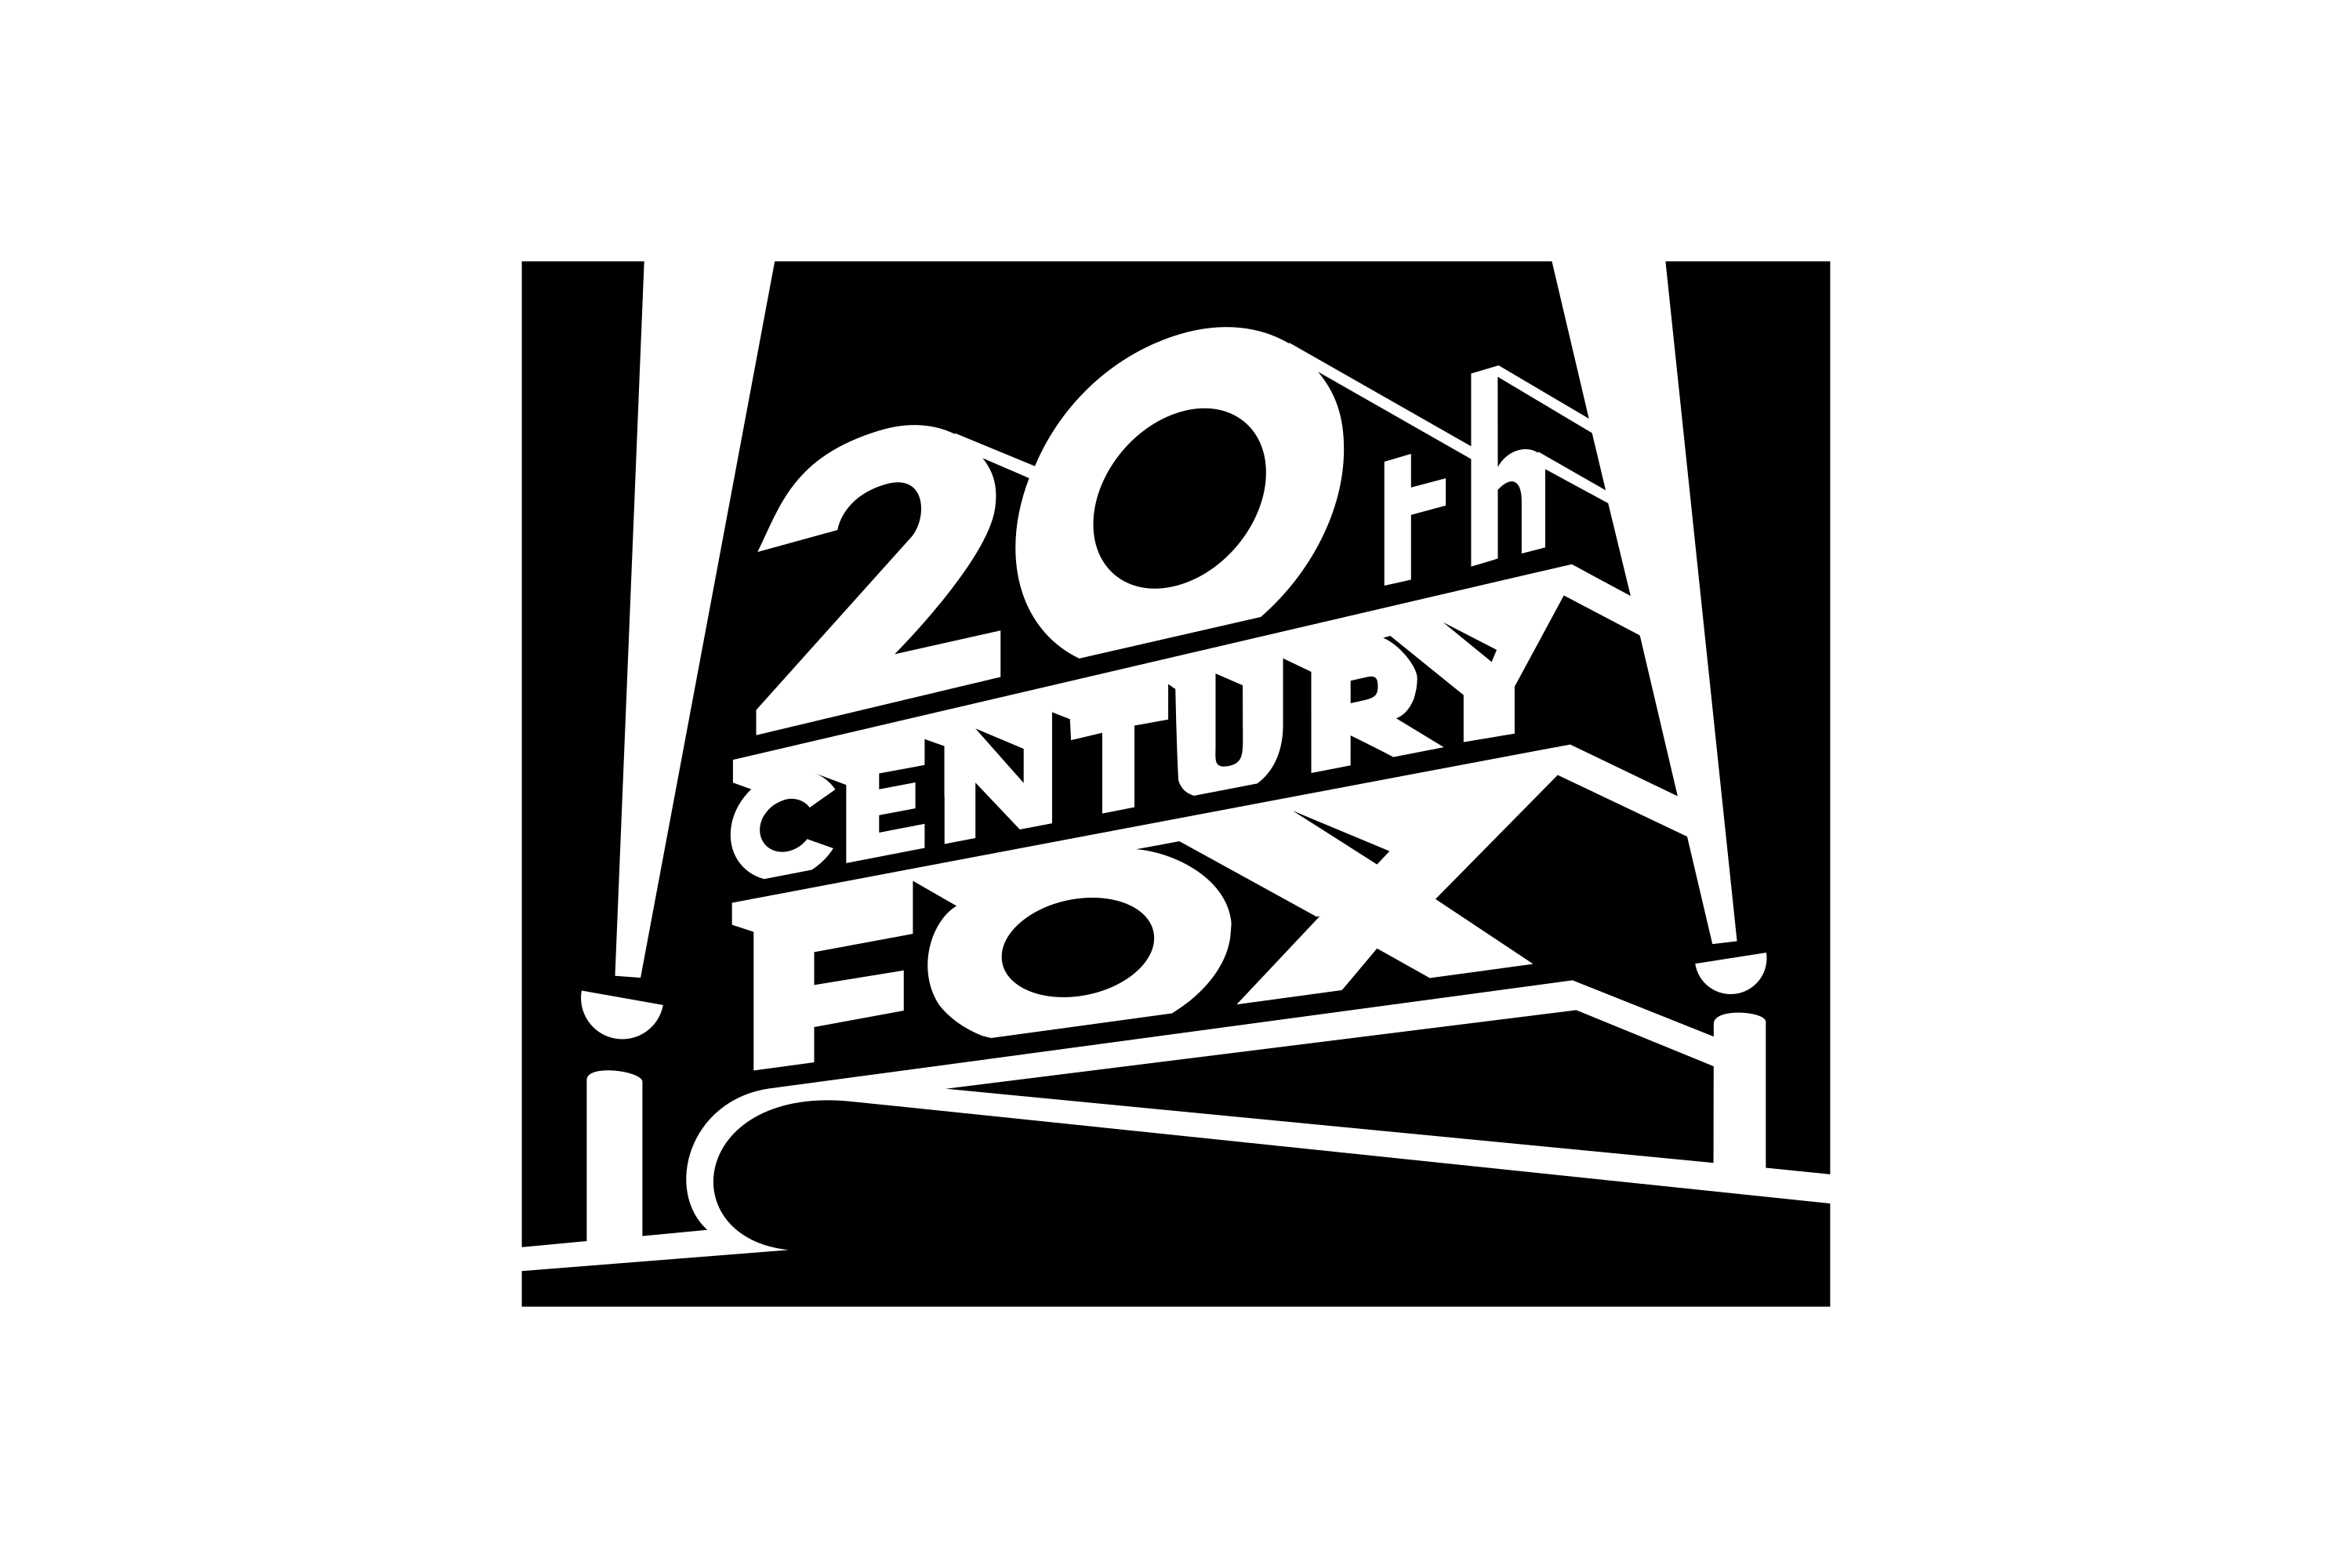 Download Fox 2000 Pictures Logo in SVG Vector or PNG File Format 